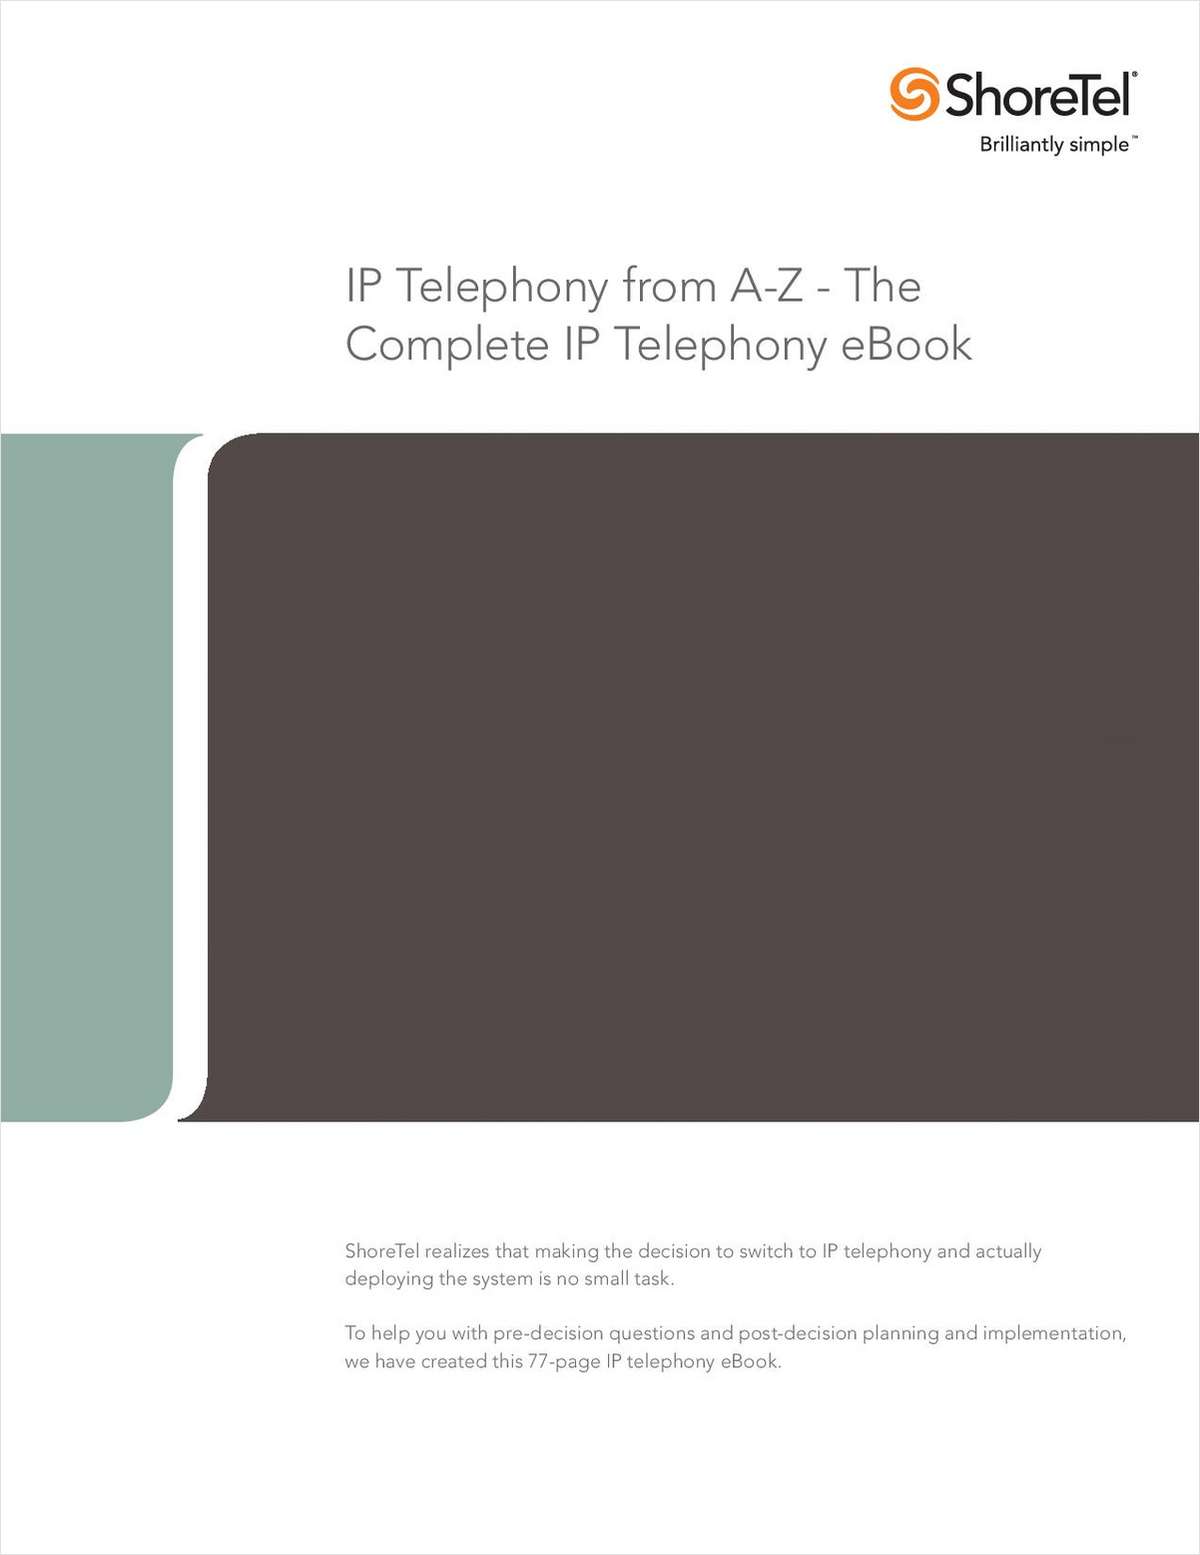 IP Telephony from A-Z - The Complete IP Telephony eBook